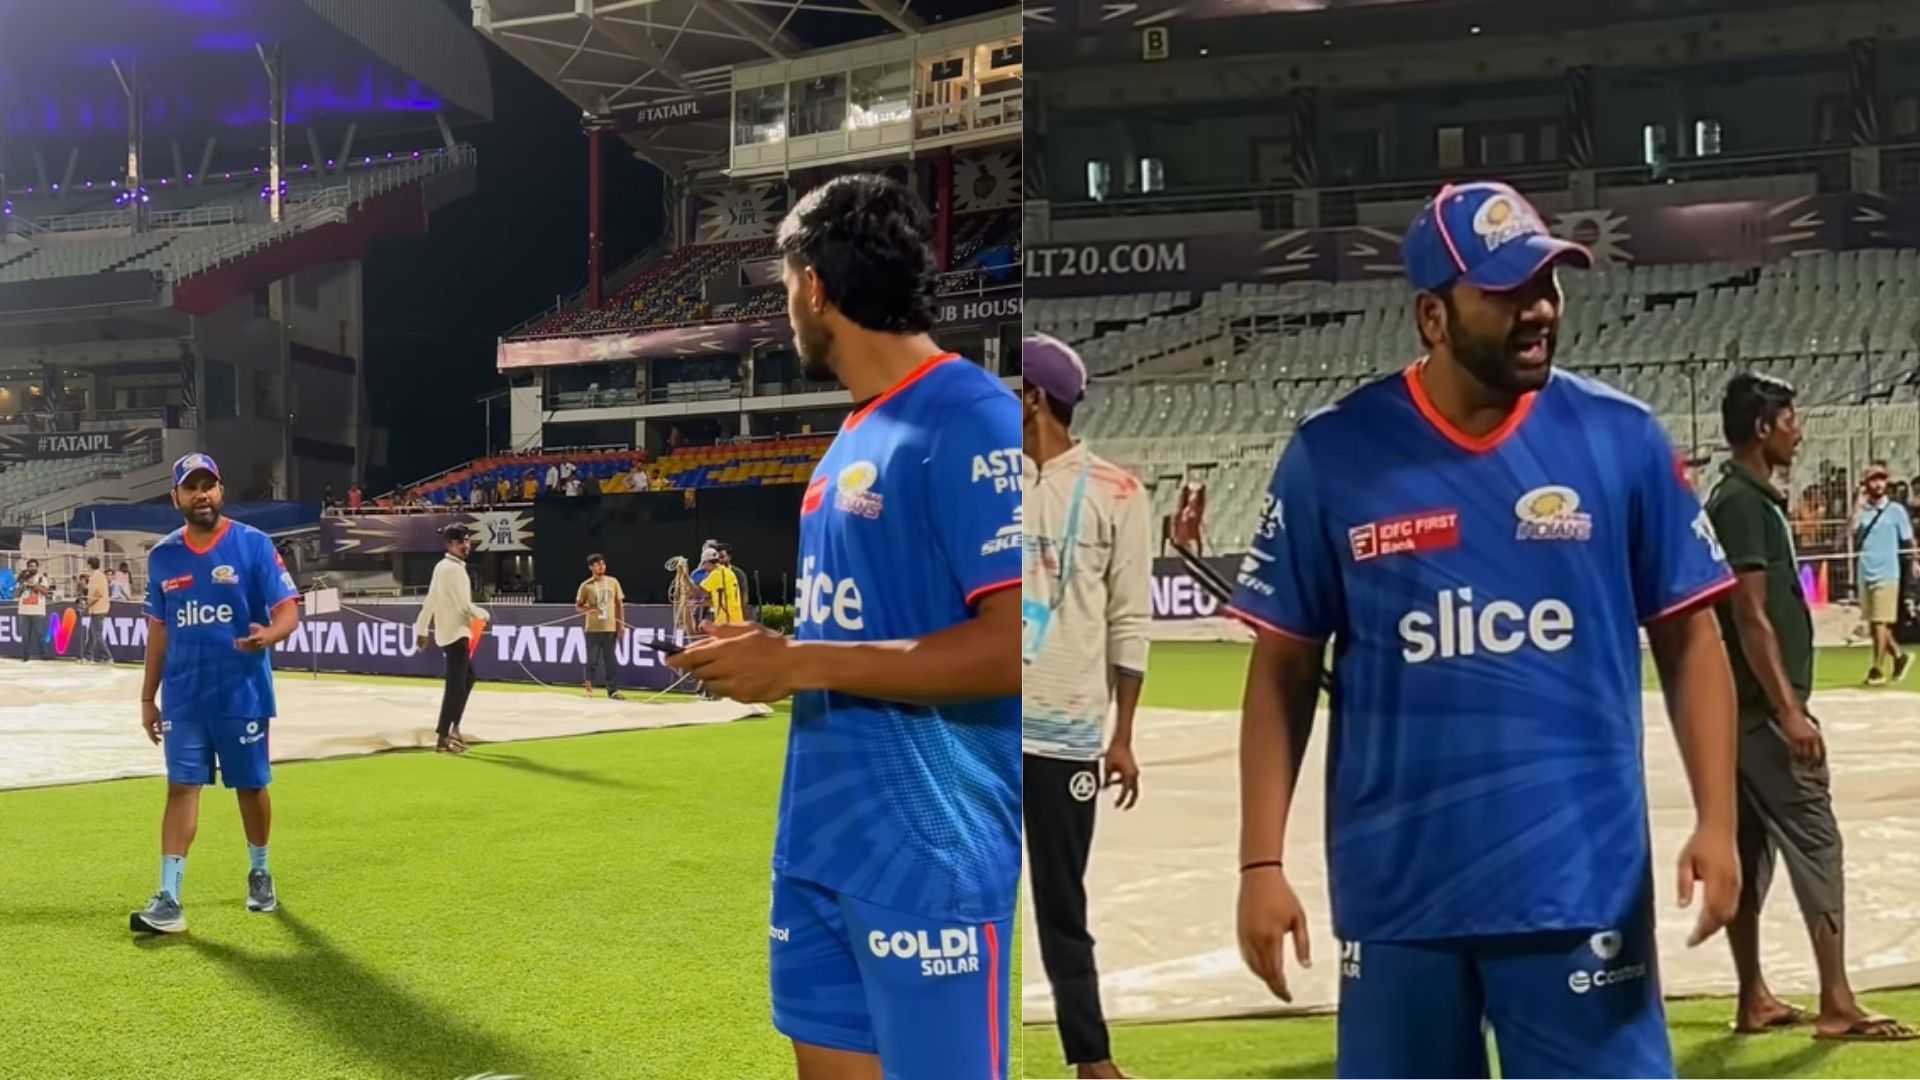 Snippets from the banter between Rohit Sharma and Tilak Varma